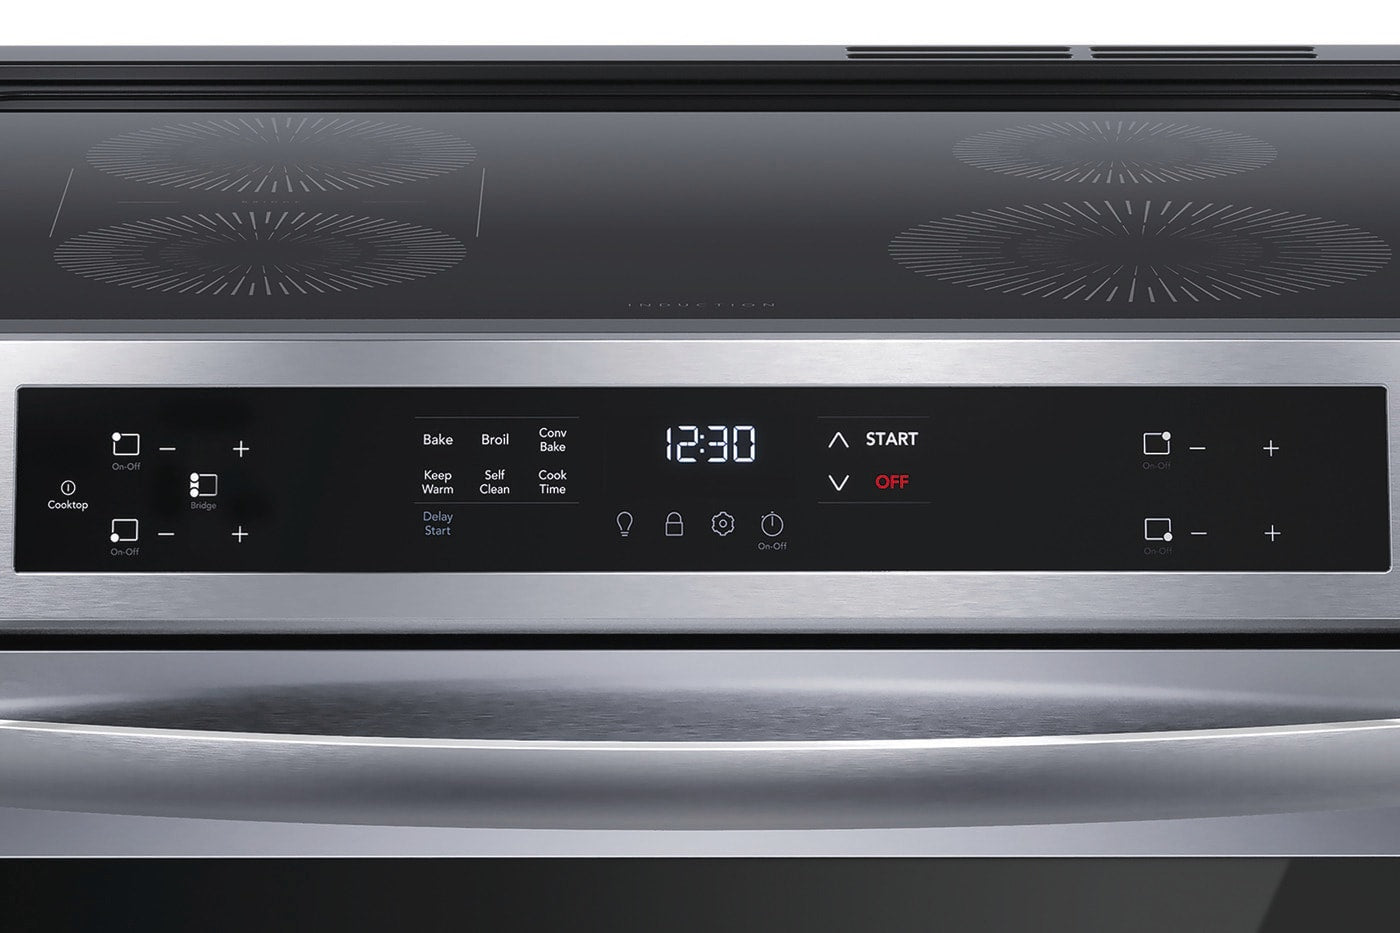 Frigidaire - 5.3 cu. ft  Induction Range in Stainless - FCFI308CAS